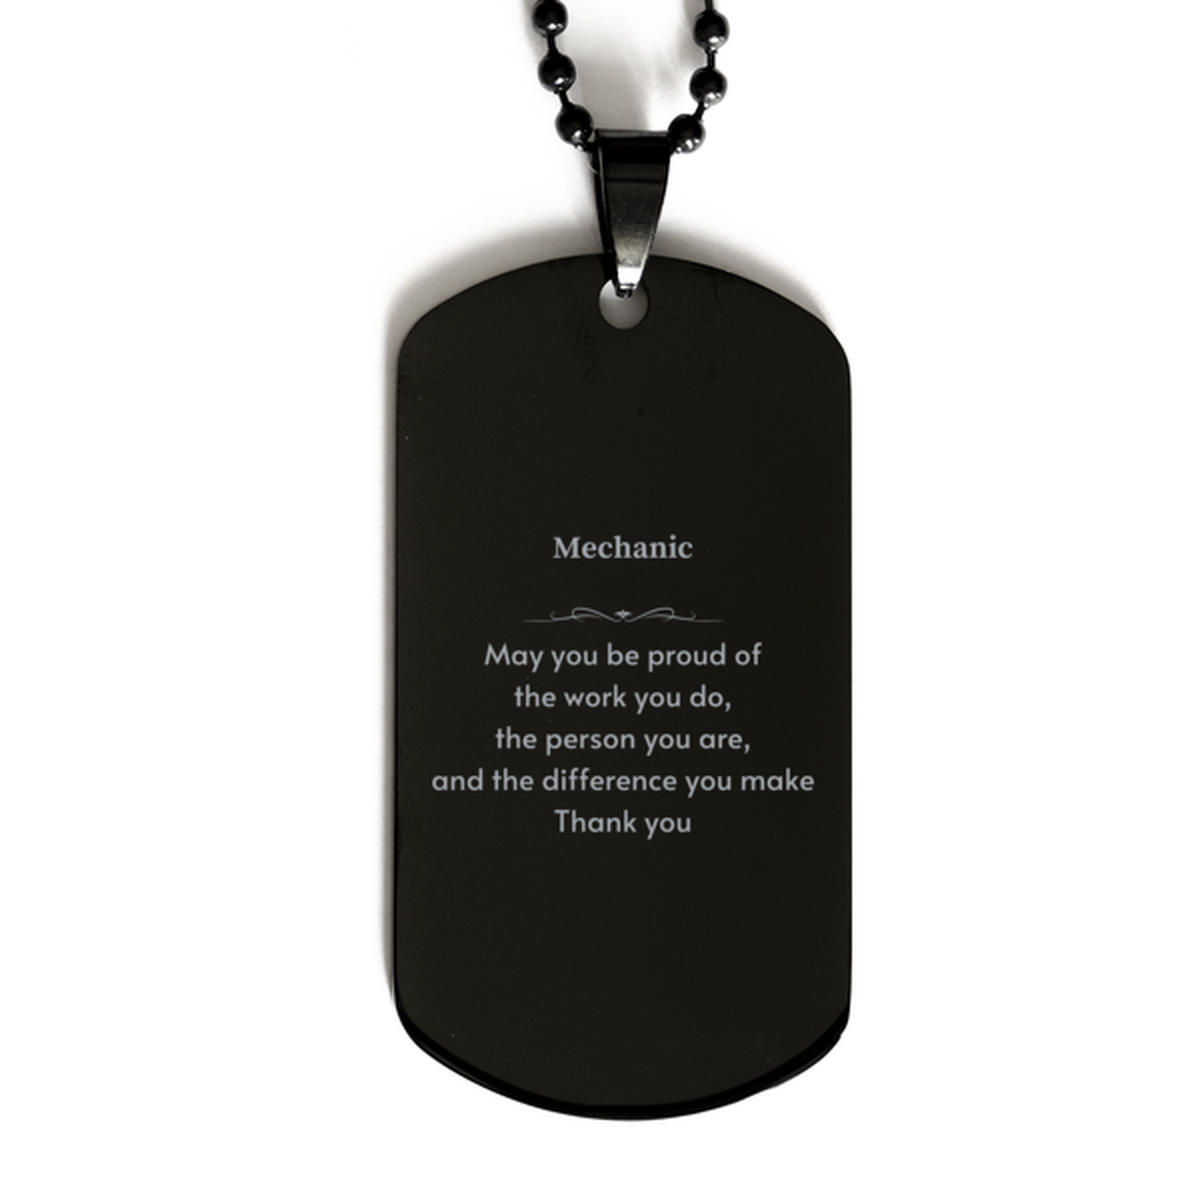 Heartwarming Black Dog Tag Retirement Coworkers Gifts for Mechanic, Mechanic May You be proud of the work you do, the person you are Gifts for Boss Men Women Friends